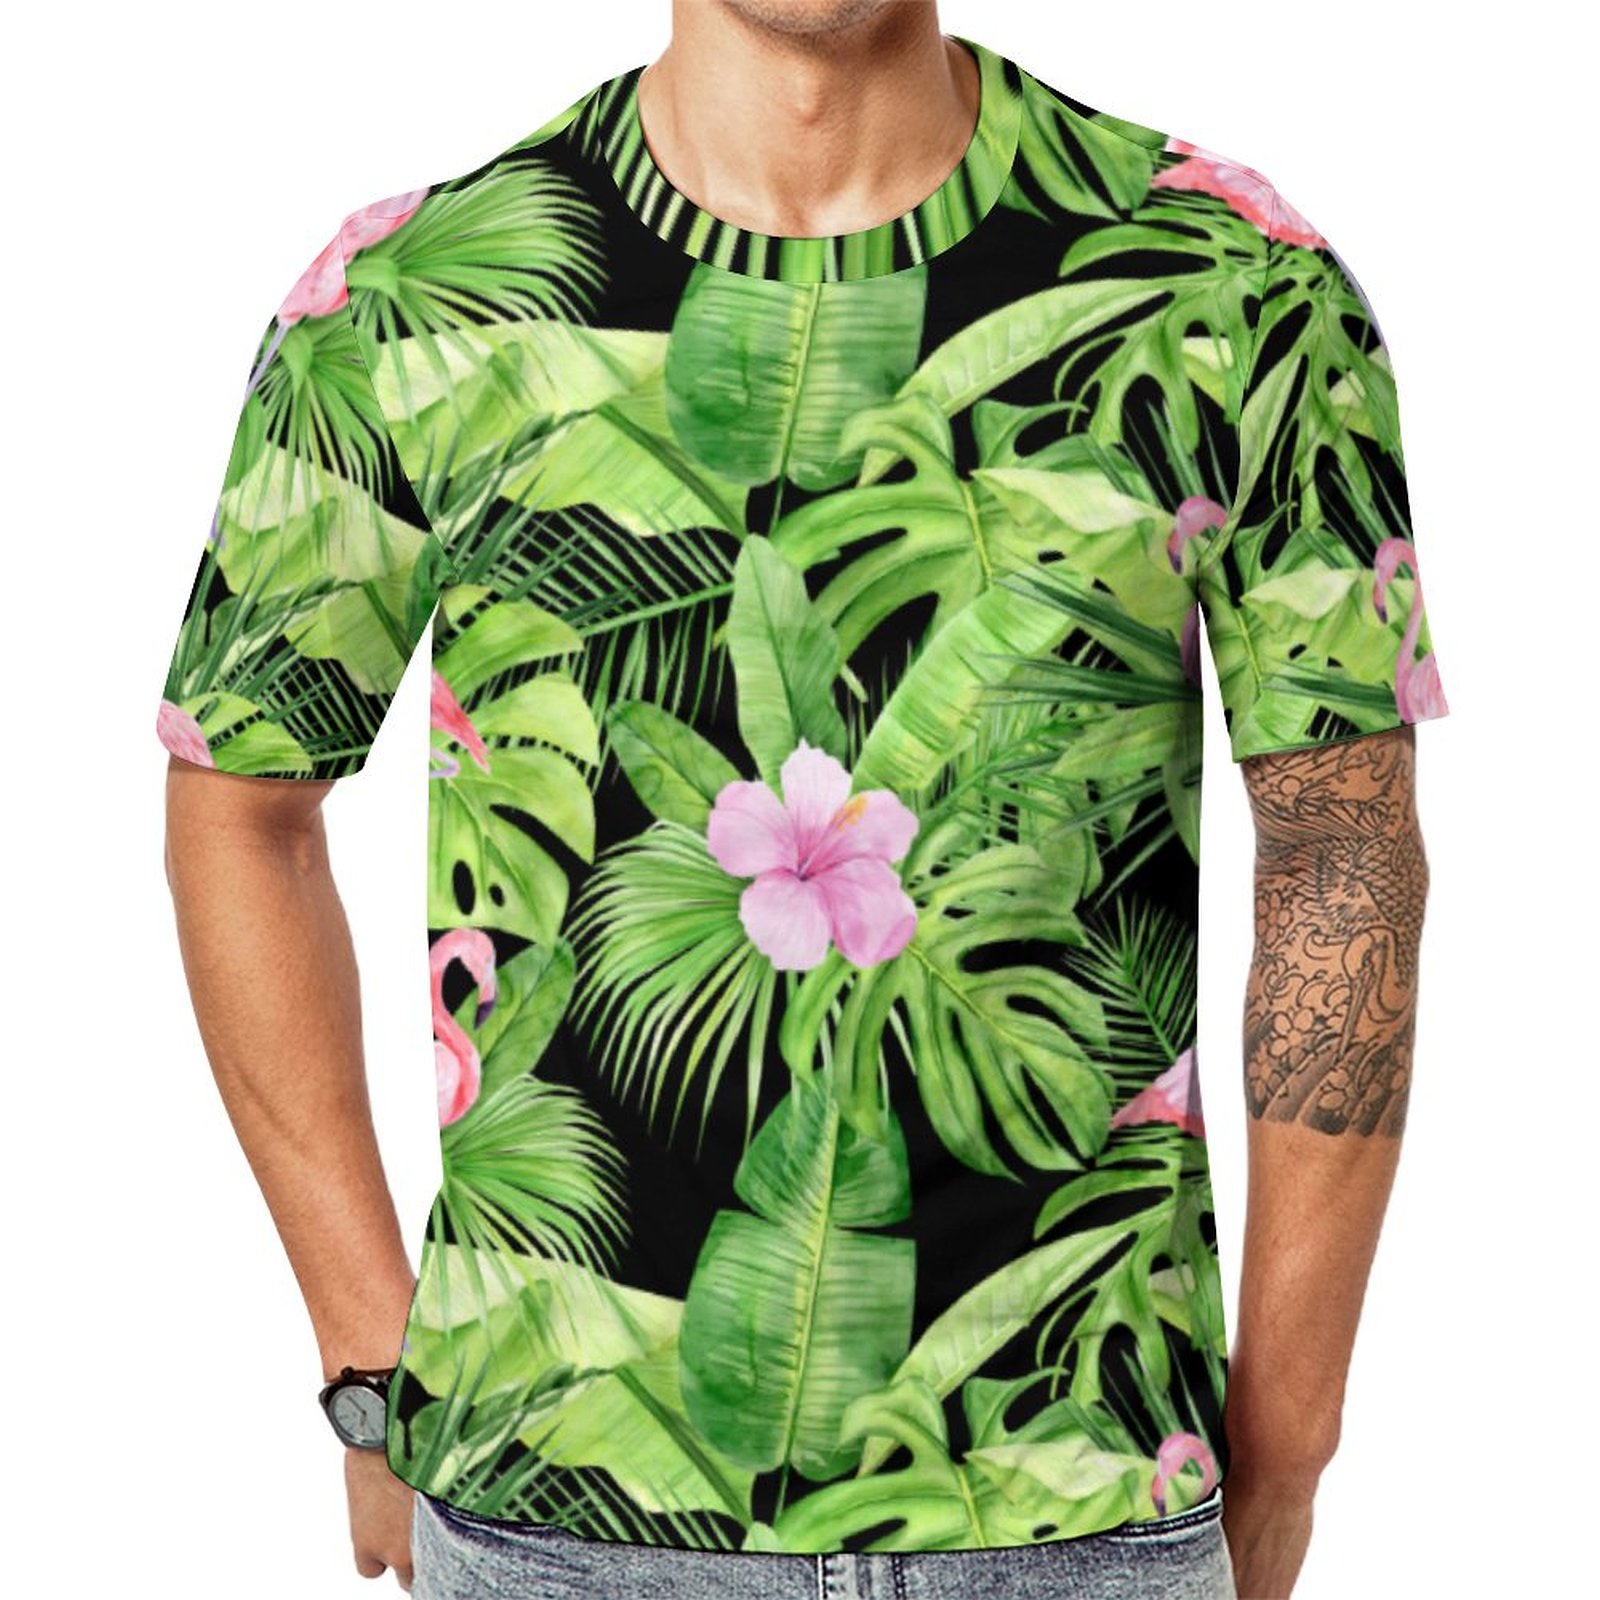 Tropical Flamingo Green Palm Fronds Short Sleeve Print Unisex Tshirt Summer Casual Tees for Men and Women Coolcoshirts